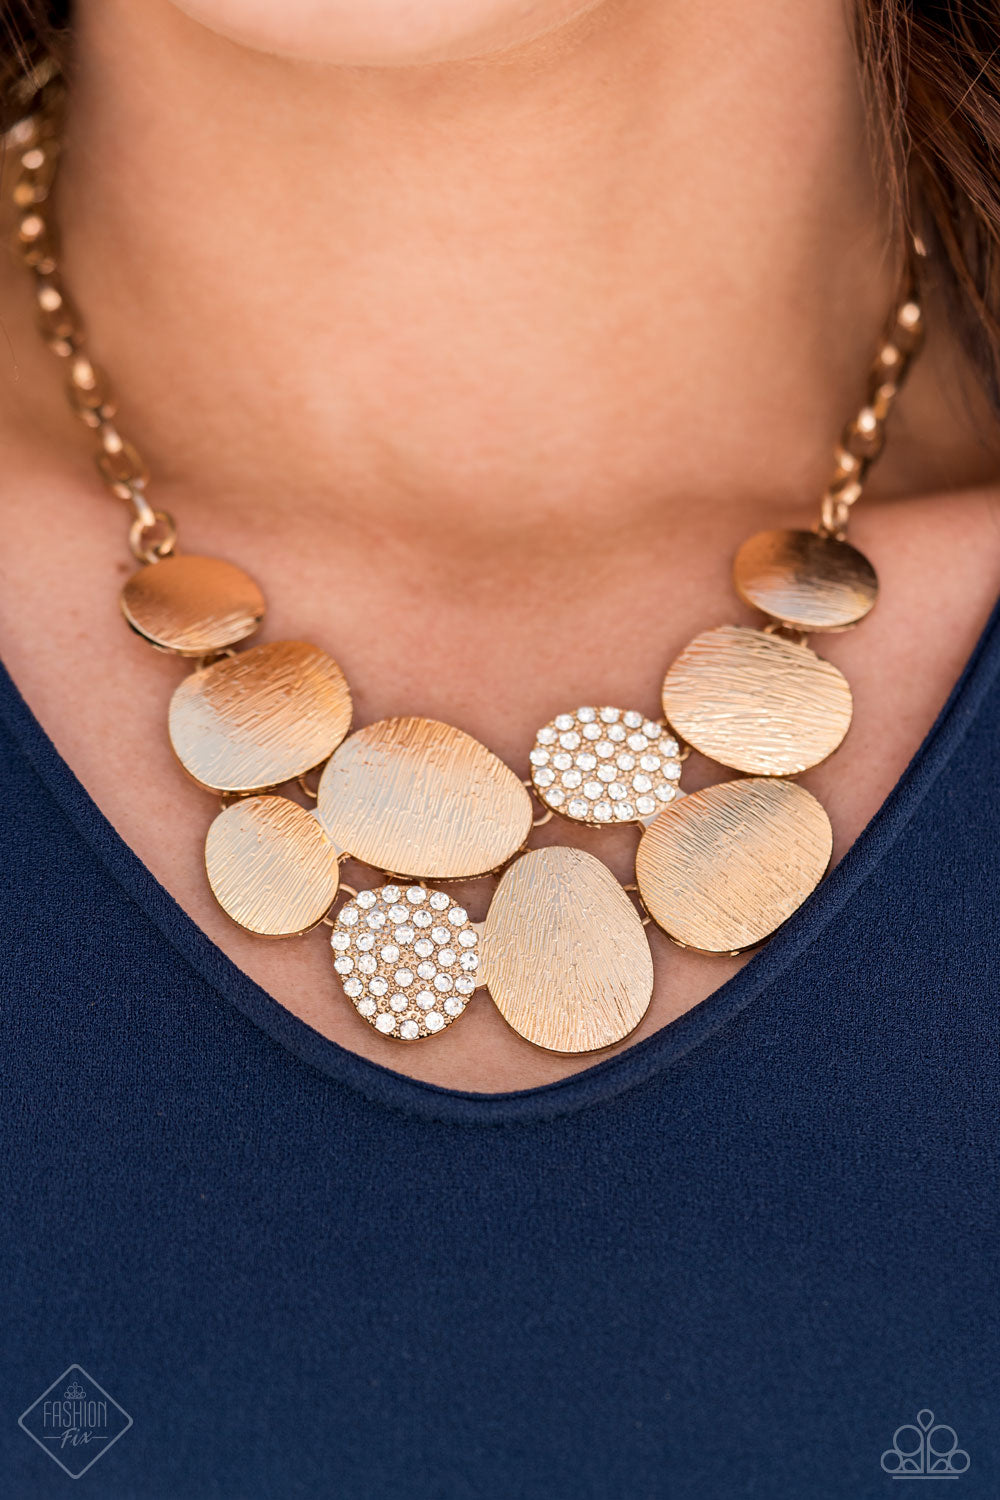 Gold necklace featuring a collection of asymmetrical oval discs connect into a clustered pendant below the collar for a refined flair.